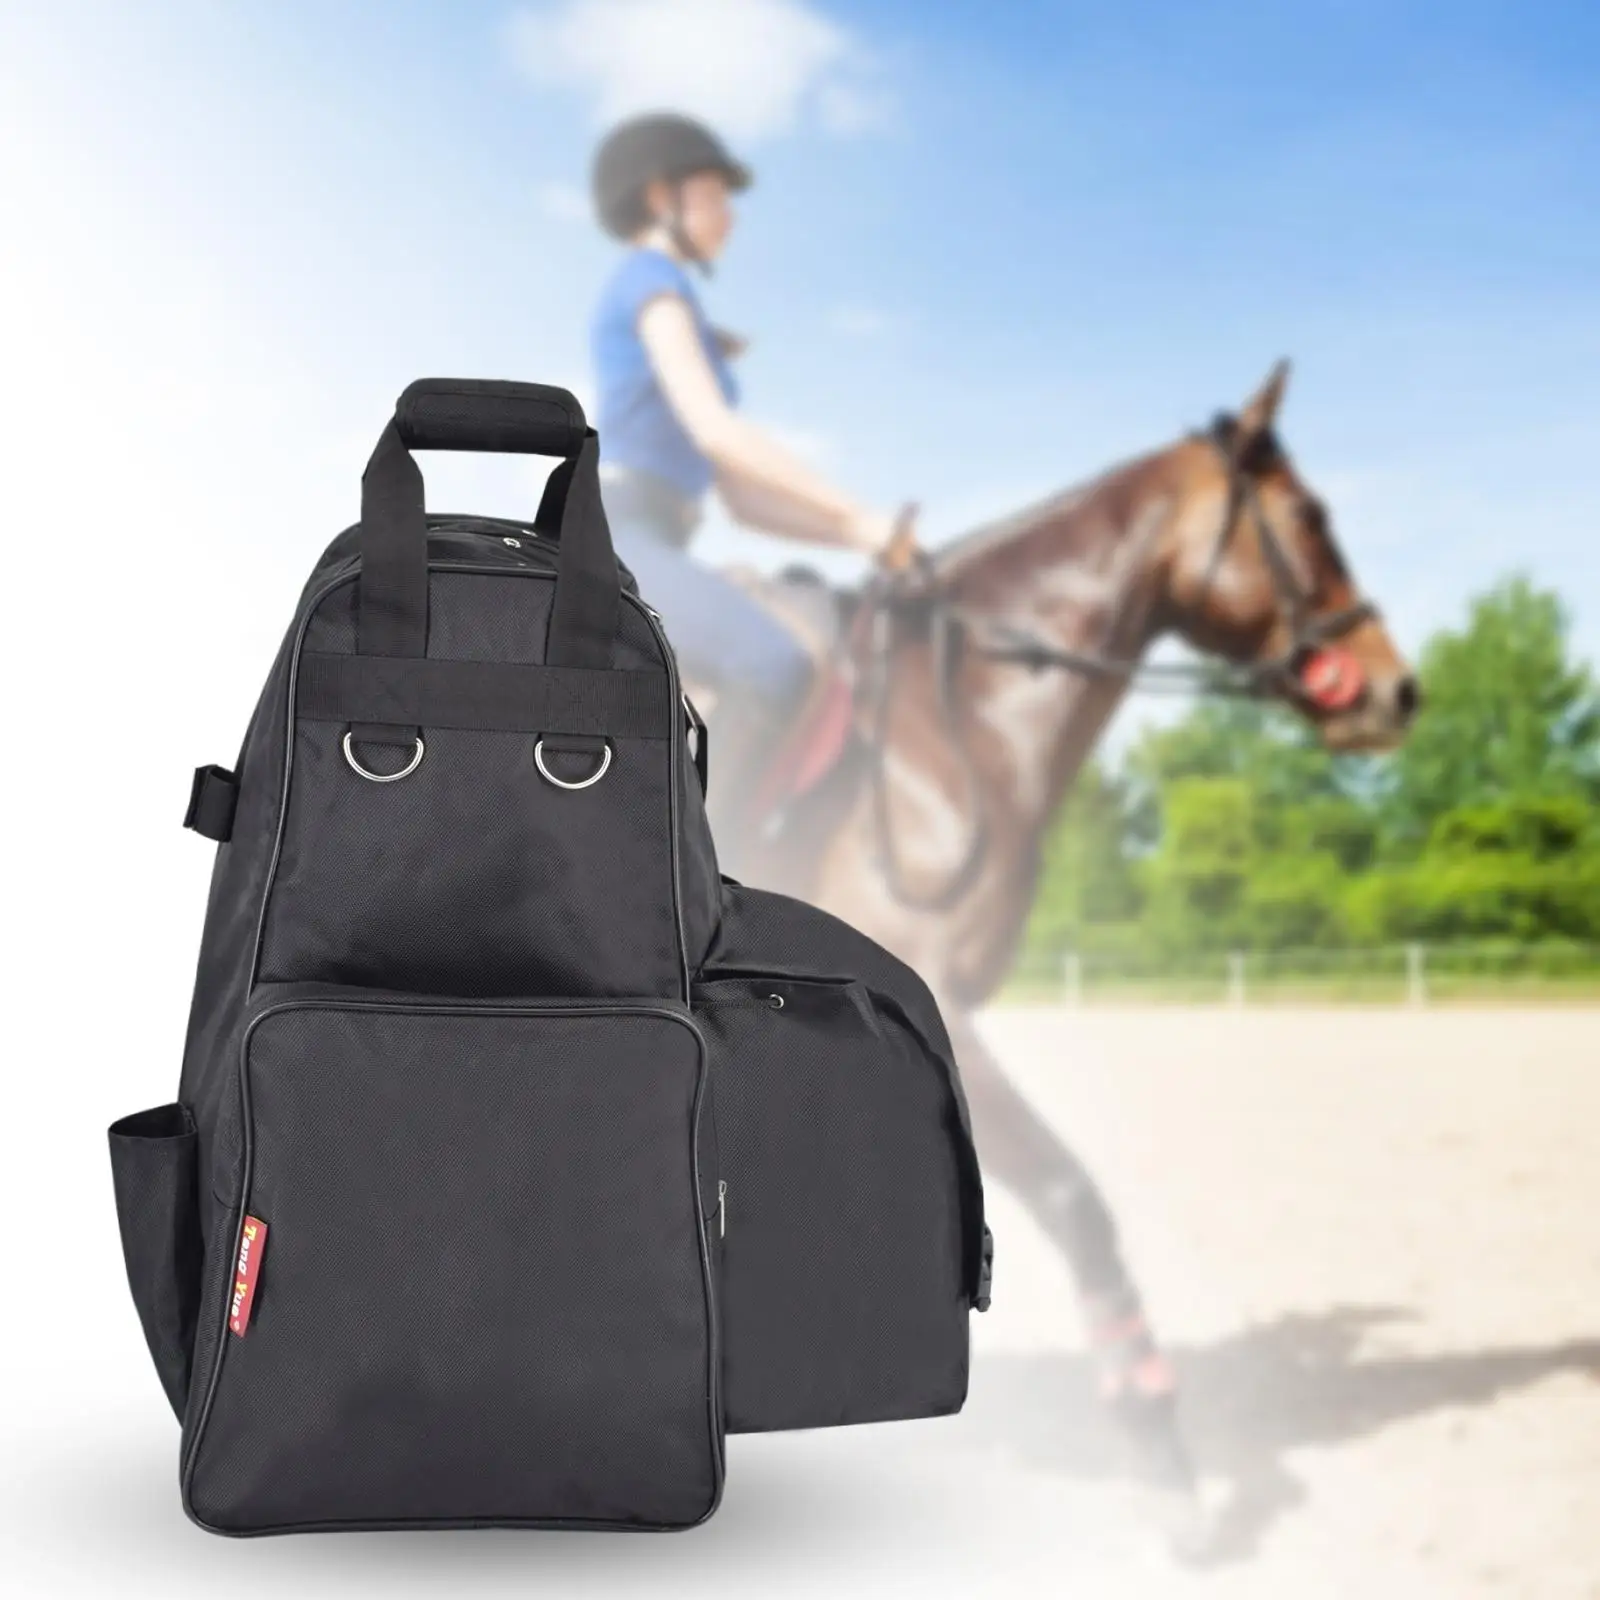 Equestrian Equipment Backpack Horse Riding Outfit Boots Gloves Pants Leg Guards Storage Bag Large Capacity Carrier